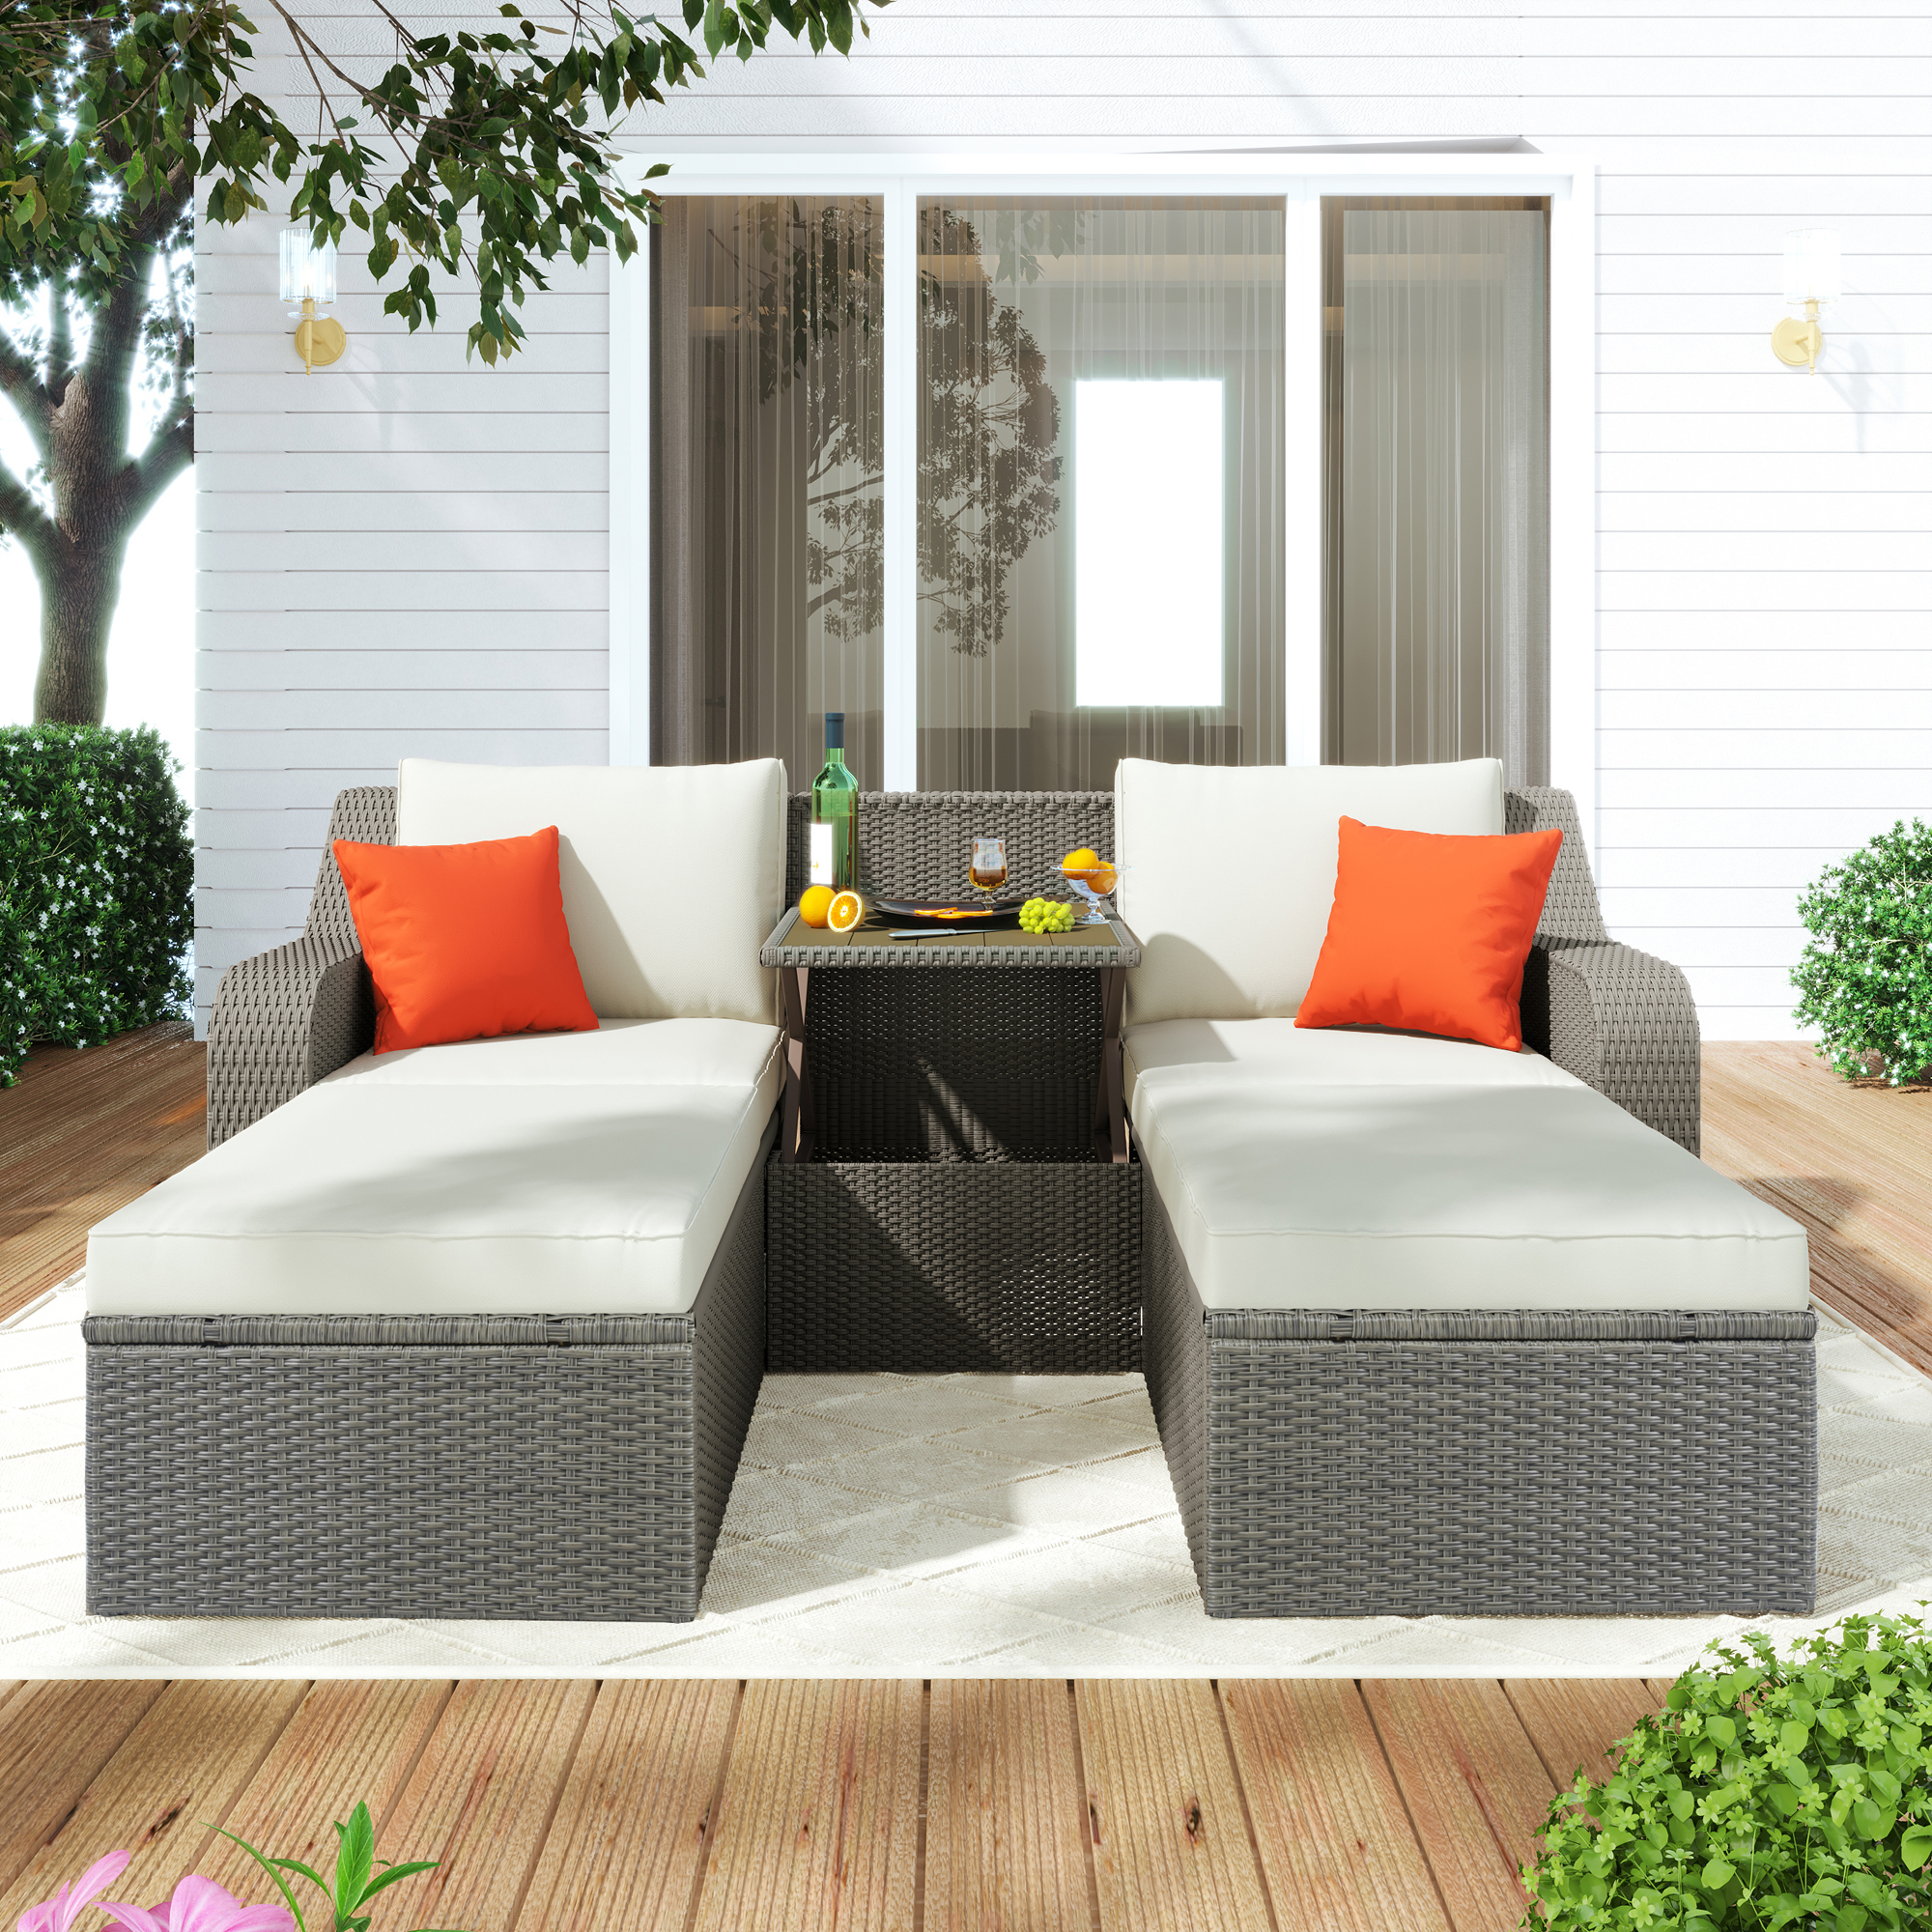 SESSLIFE 3-Piece Patio Conversation Set, Gray Rattan Patio Sectional Sofa with Loveseat, 2 Ottomans, 1 Coffee Table, Patio Couches Sets for Porch Garden Balcony - image 1 of 9